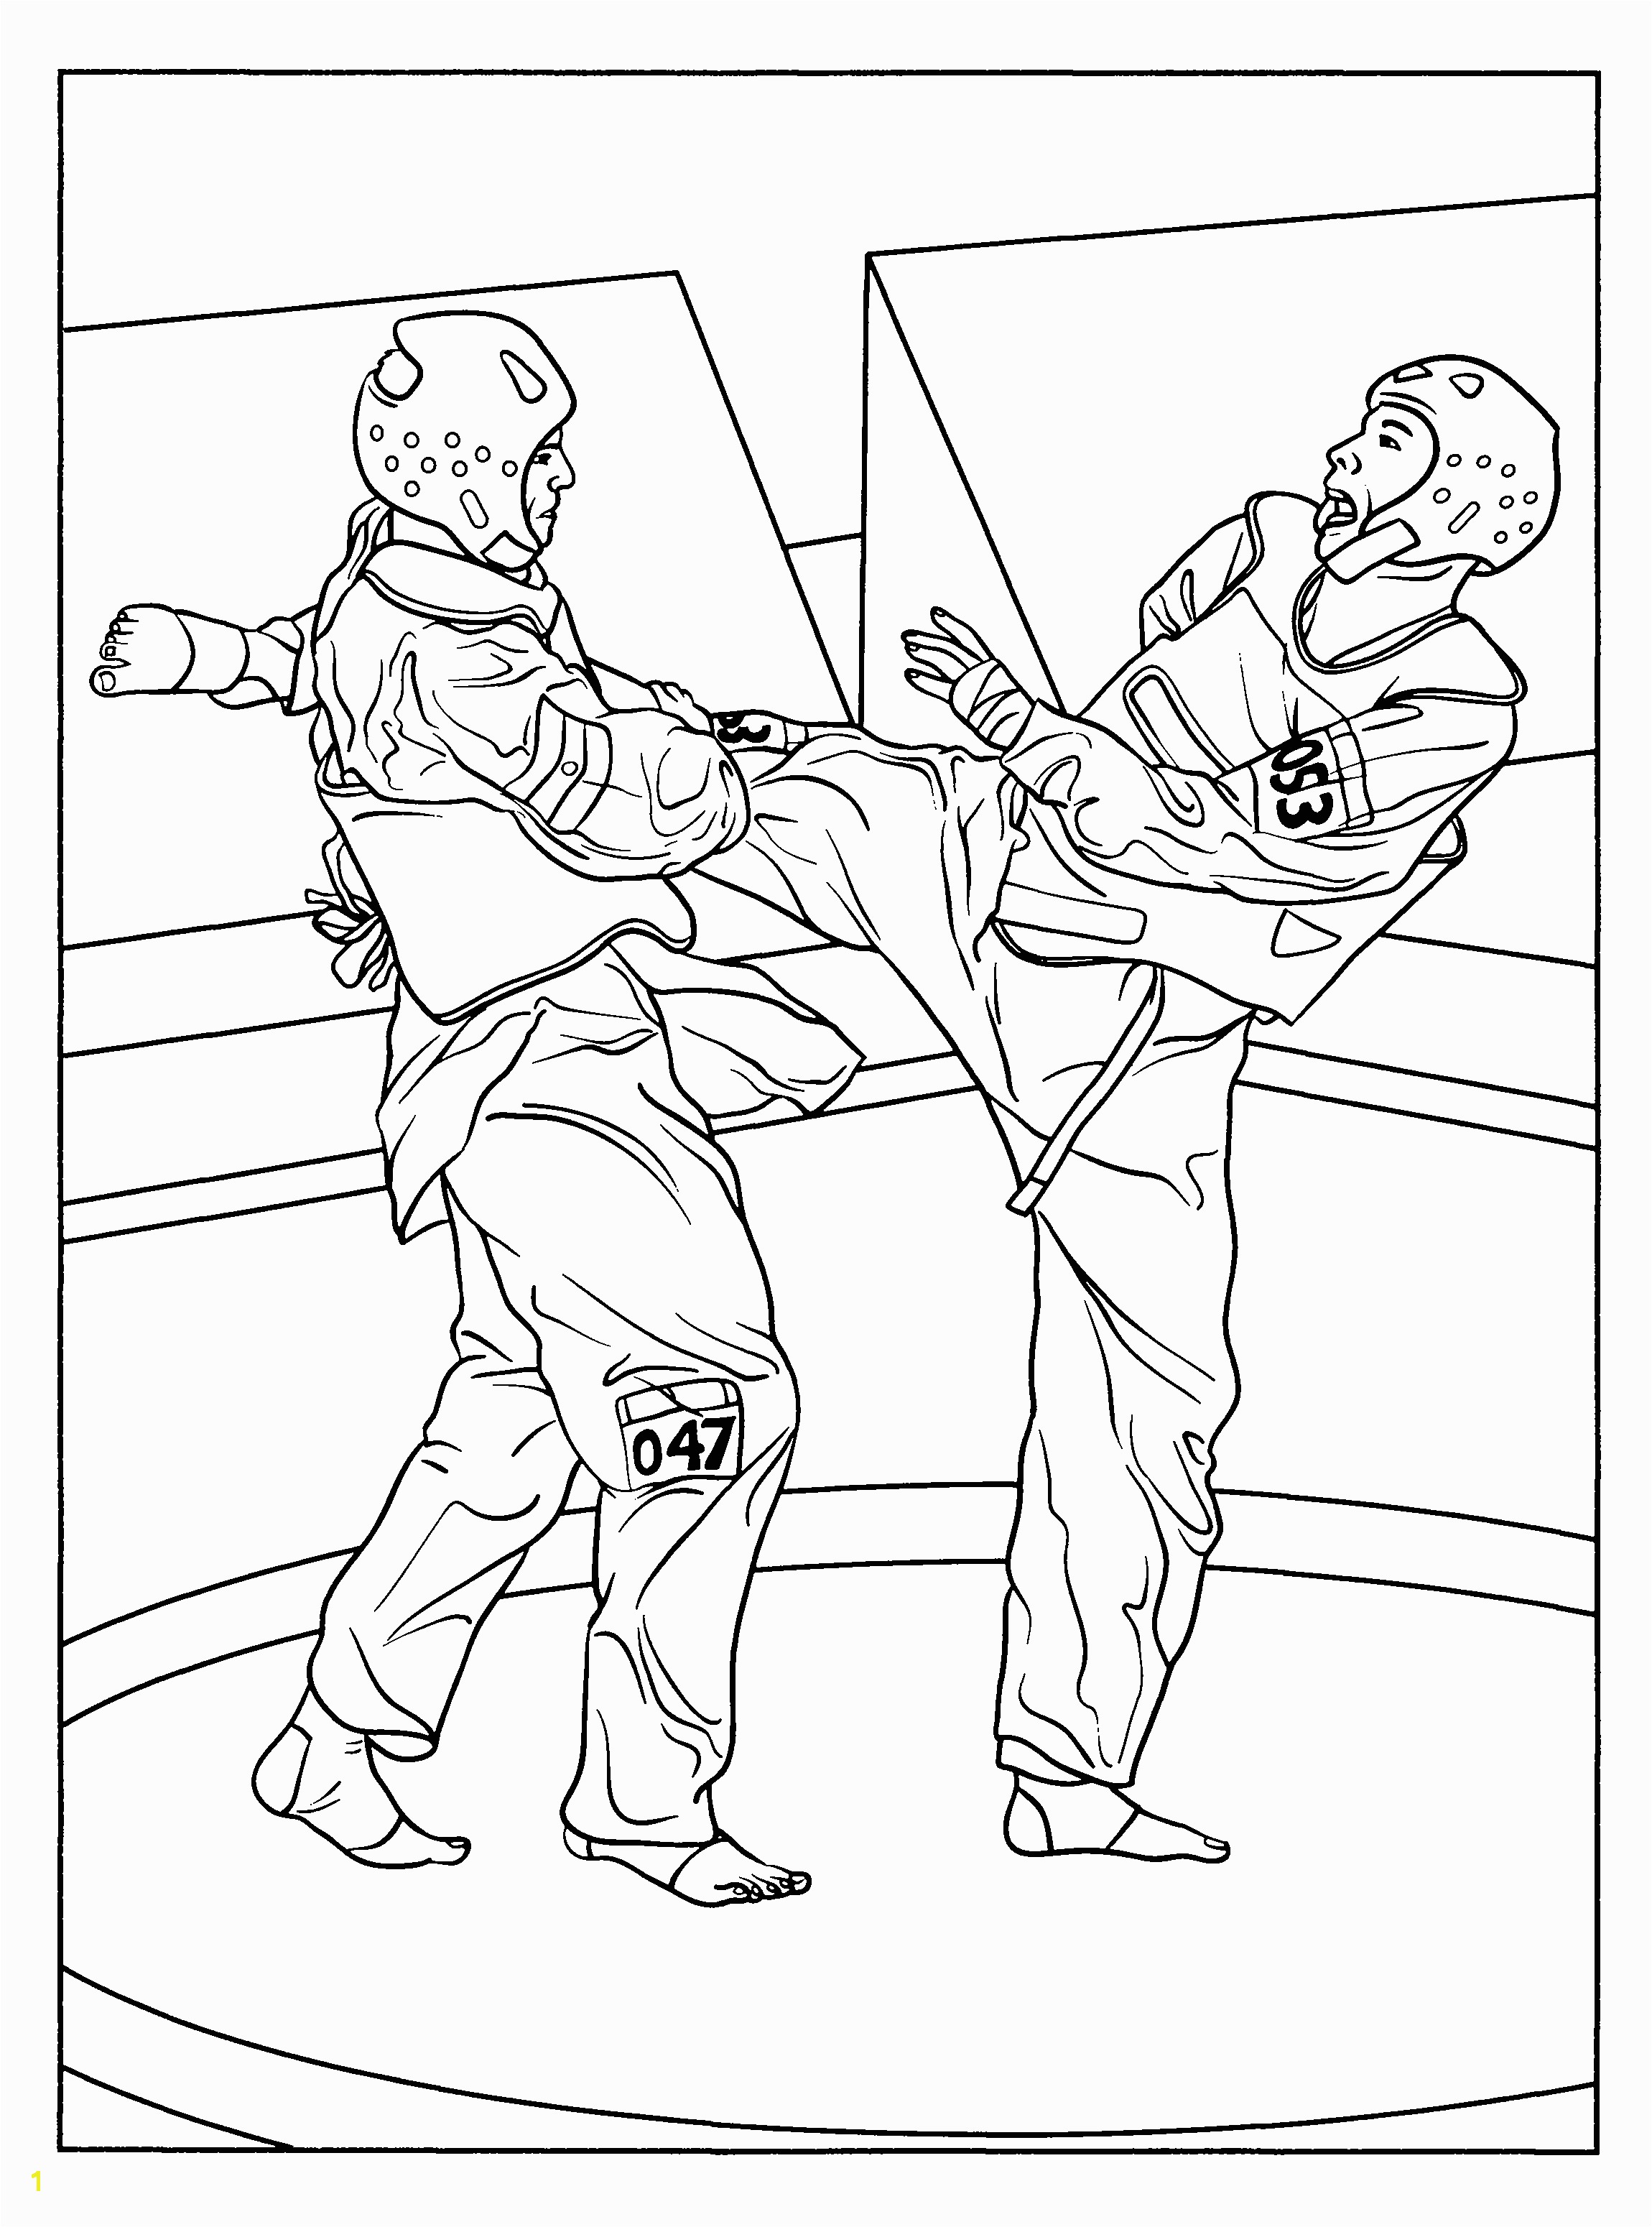 karate coloring pages for kids